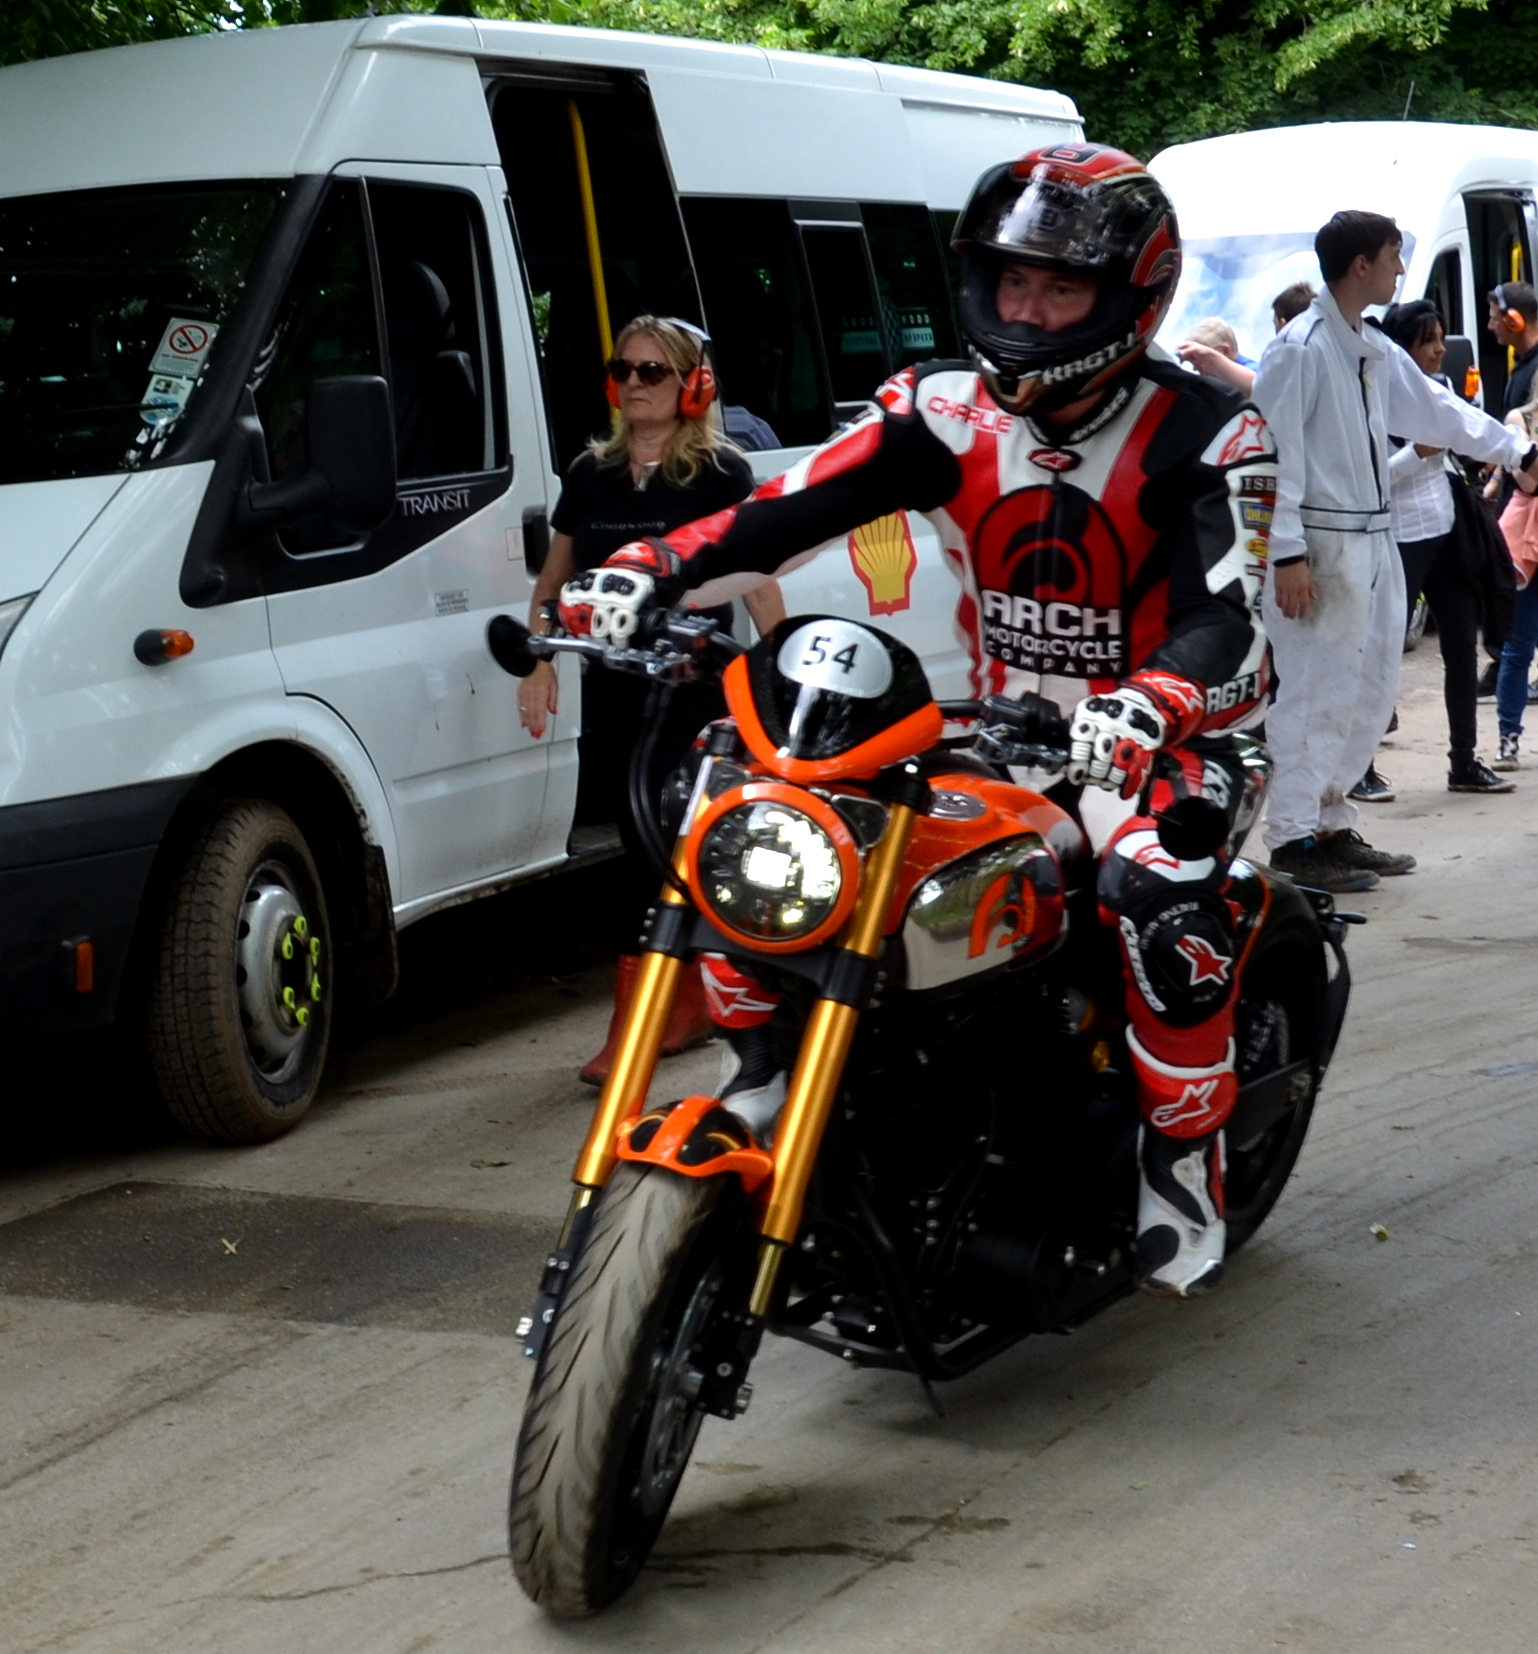 Kearnu on his Arch Motorcyle prior to the hillclimb at Goodwood FOS 